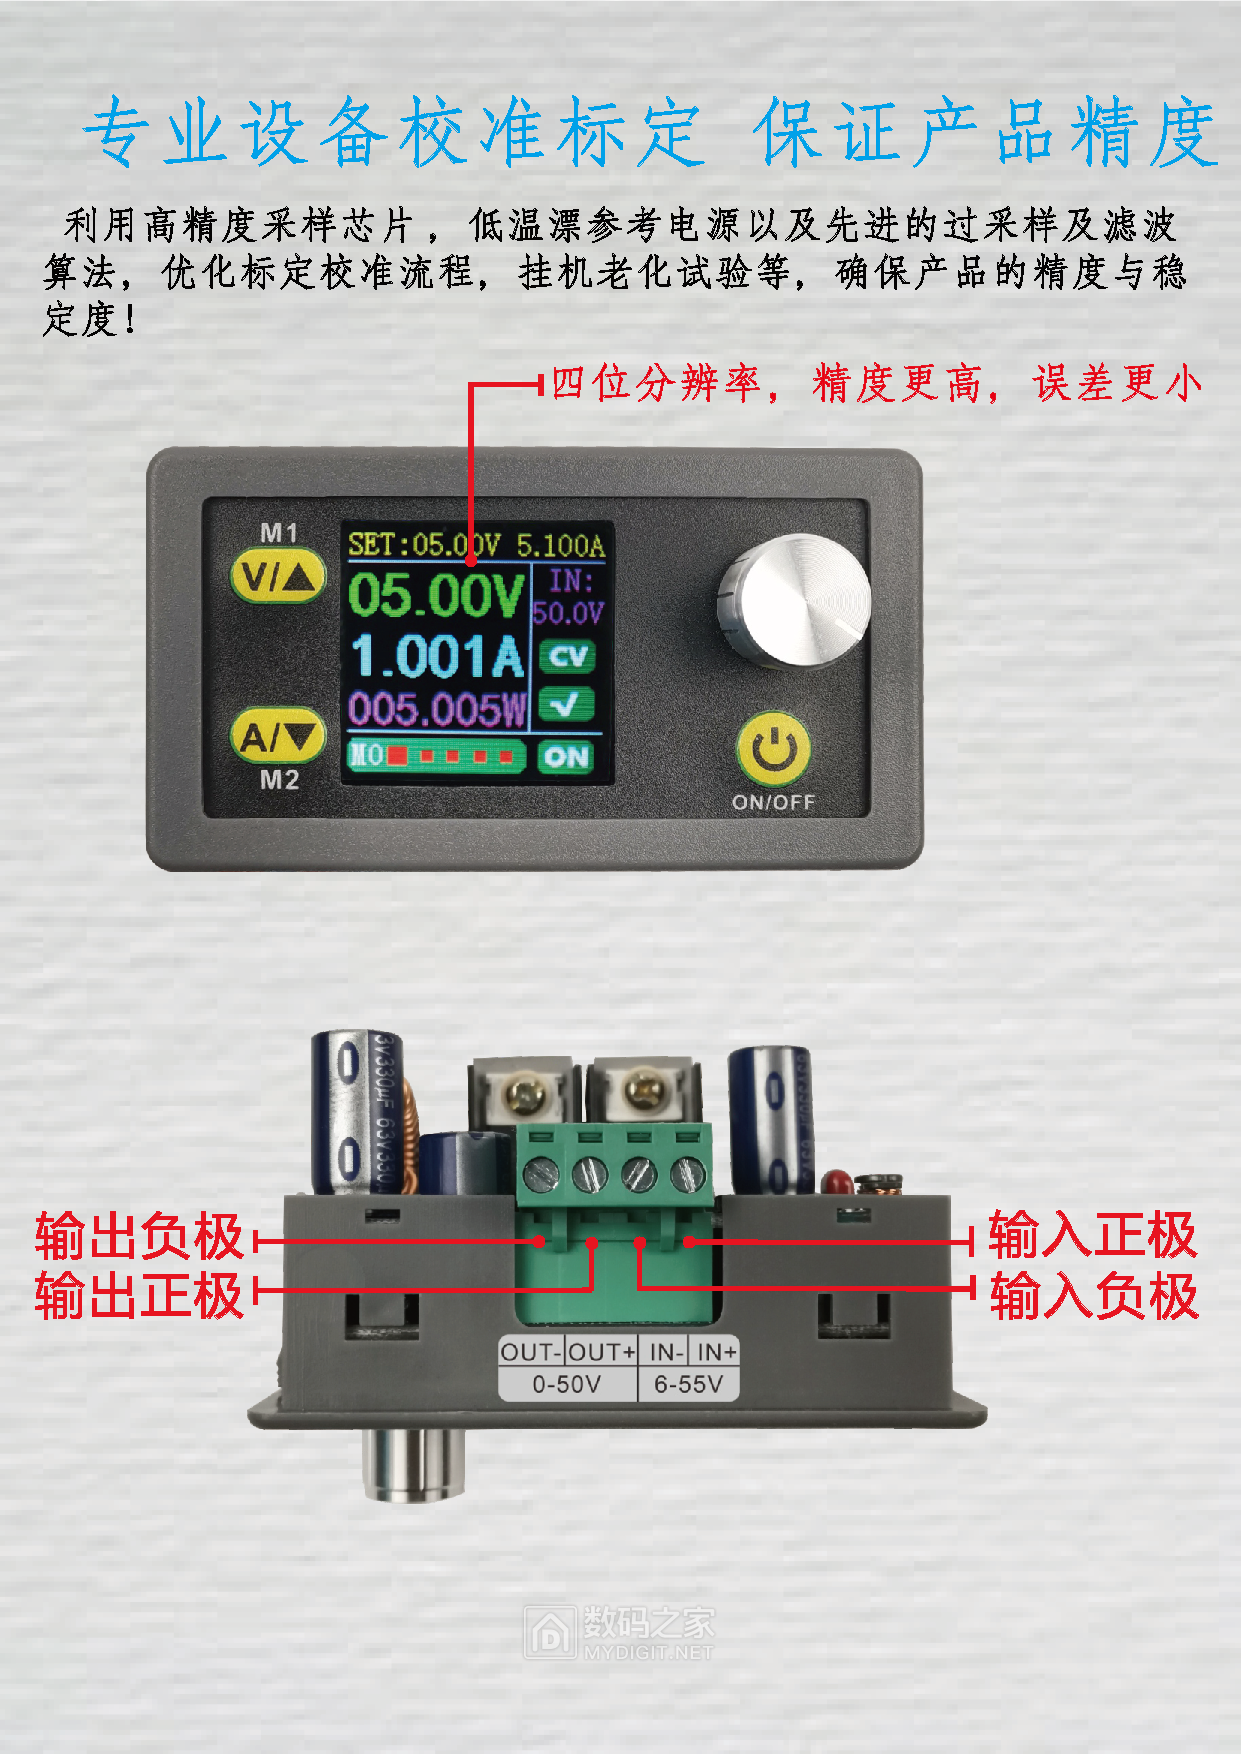 WZ5005E中文说明书_页面_04.png